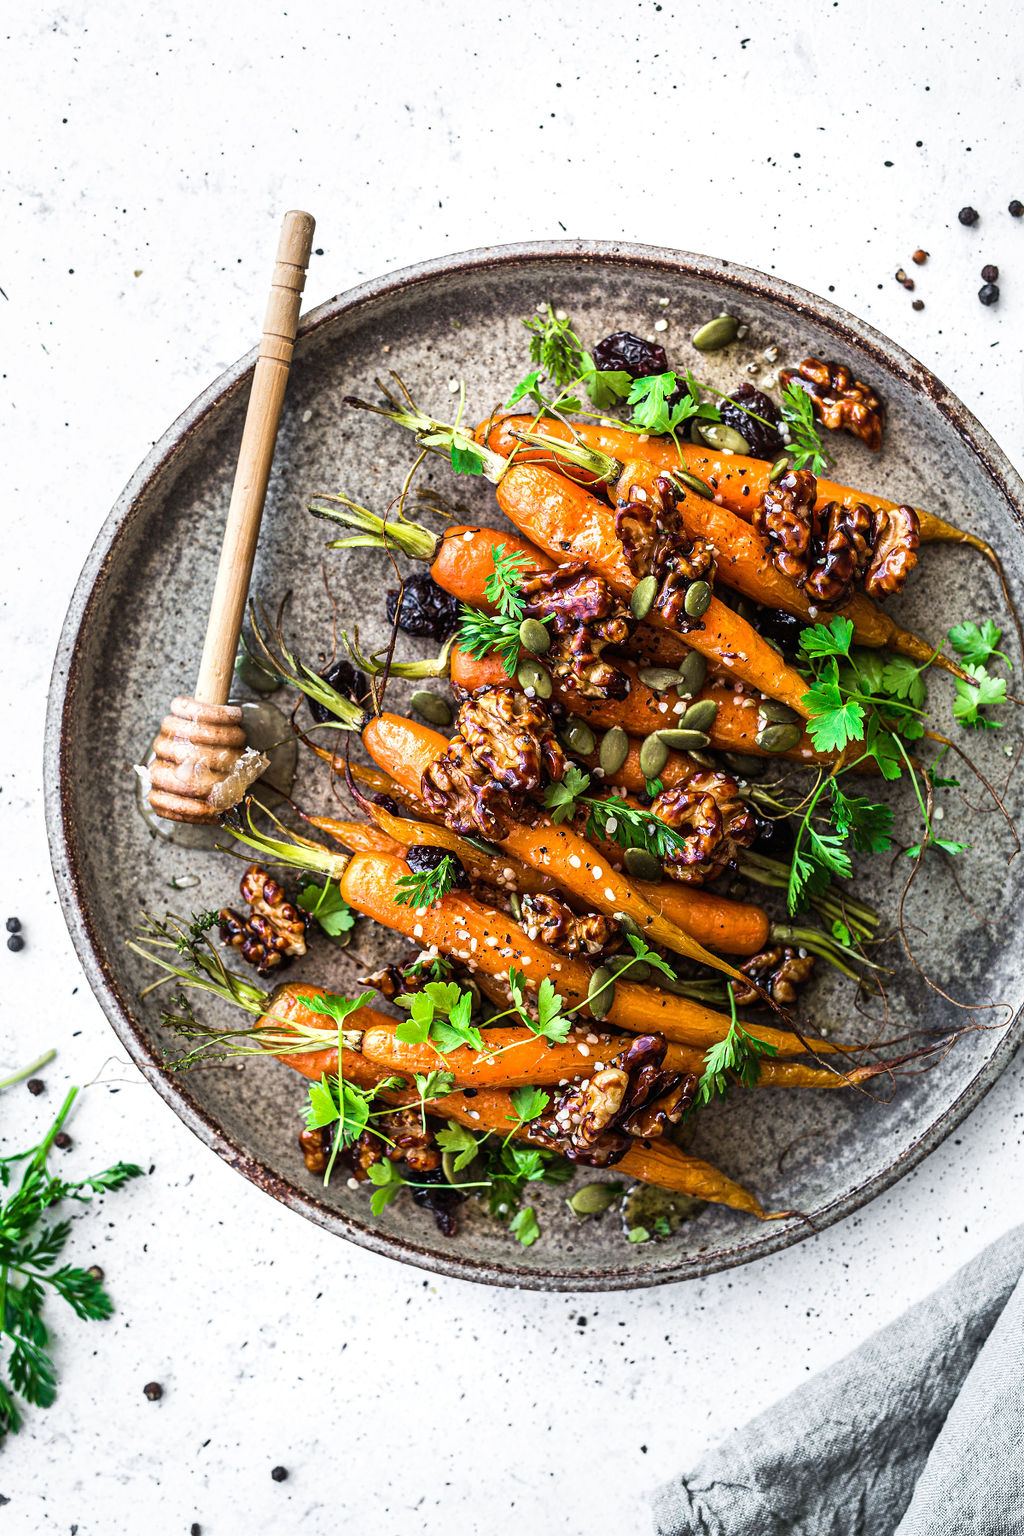 Carrots! This is a gorgeous flatlay image of a bunch of roasted carrots on a plate. They're sprinkled with greens and honey. DELISH.